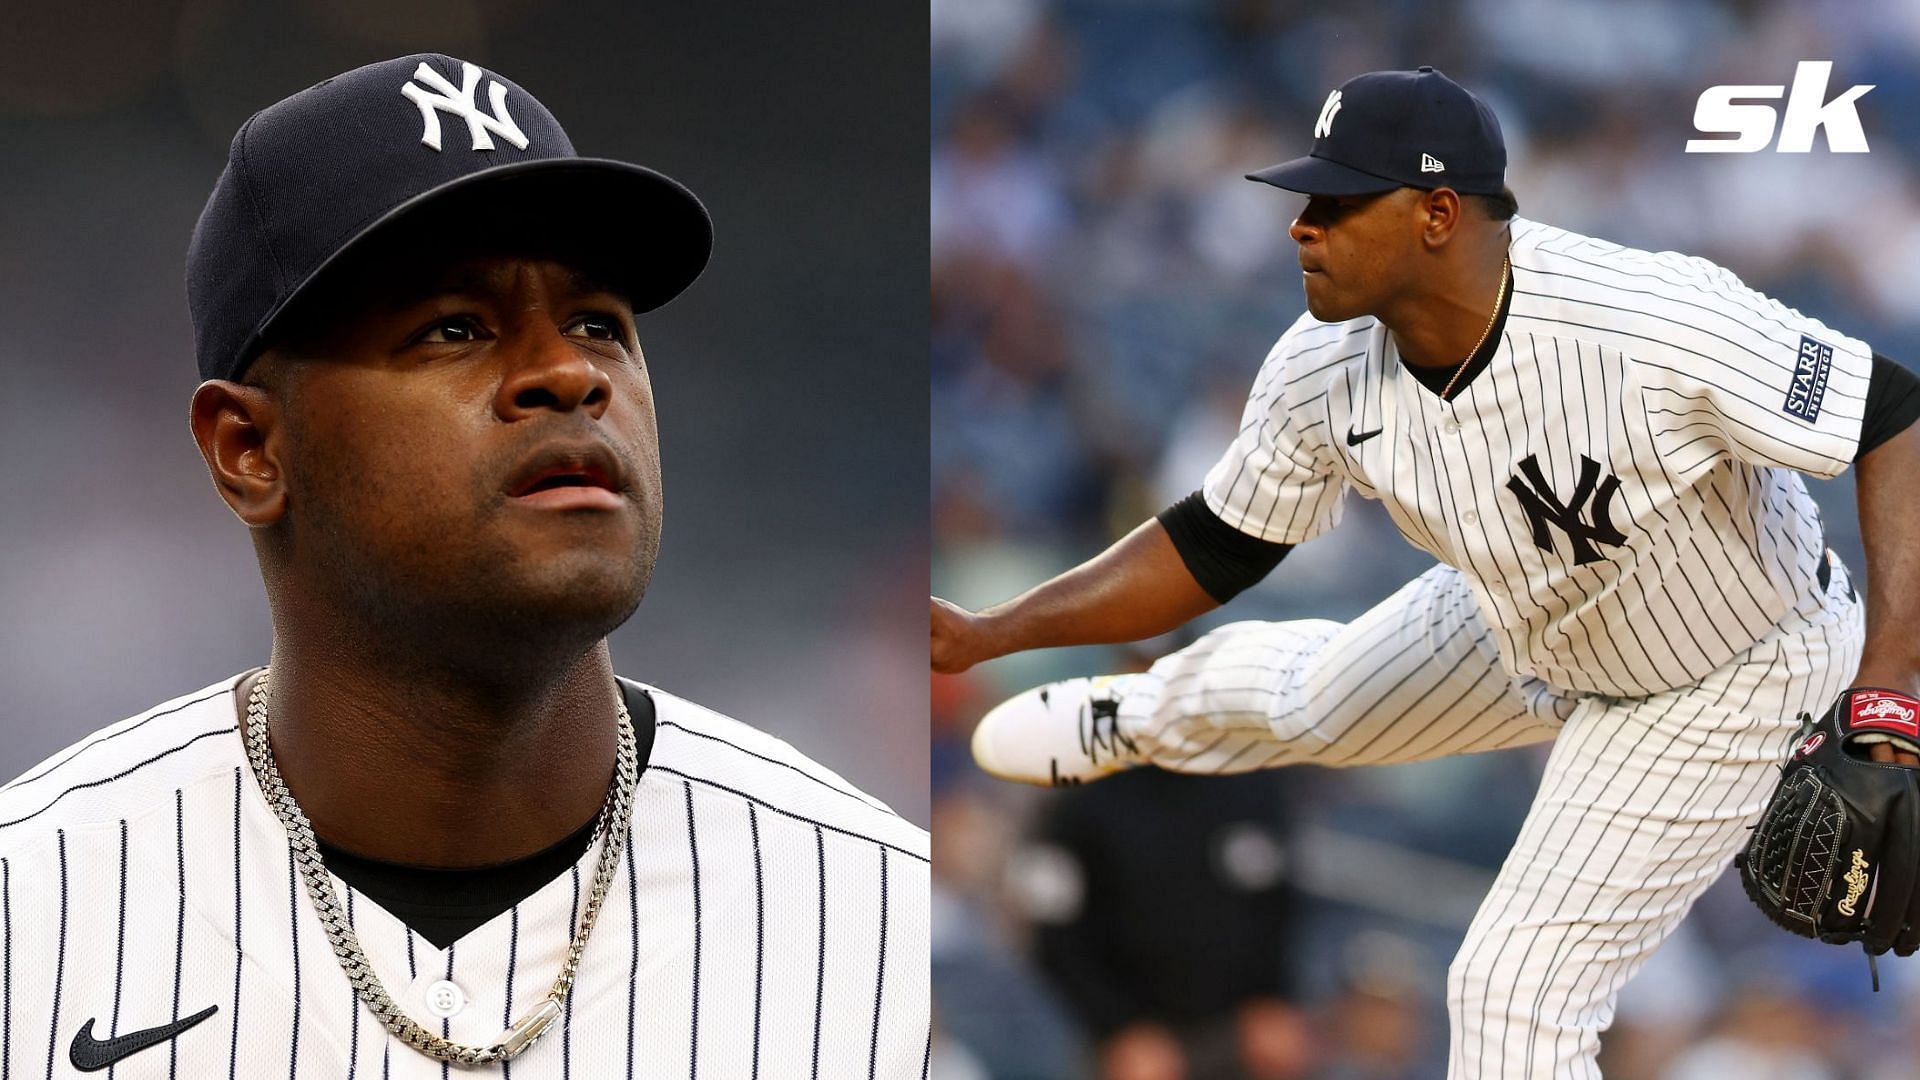 New York Mets starter Luis Severino believed he would spend his career with the New York Yankees before joining his new club